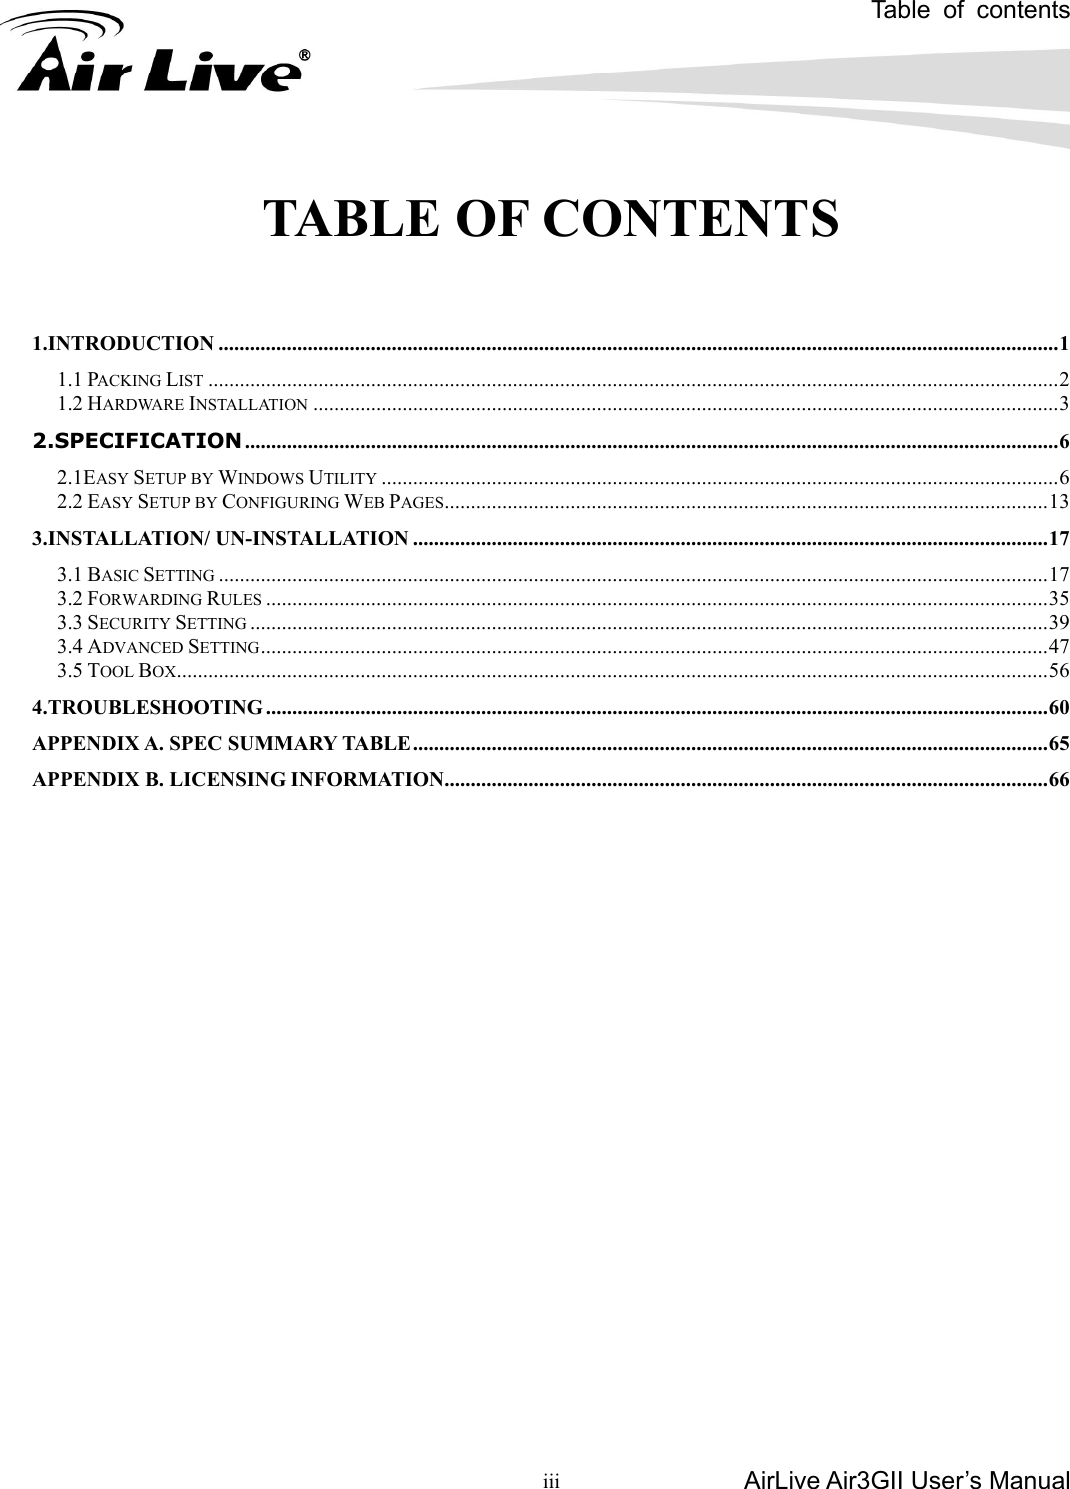 Table of contents AirLive Air3GII User’s Manual  iii      TABLE OF CONTENTS   1.INTRODUCTION ................................................................................................................................................................1 1.1 PACKING LIST ..................................................................................................................................................................2 1.2 HARDWARE INSTALLATION ..............................................................................................................................................3 2.SPECIFICATION...........................................................................................................................................................6 2.1EASY SETUP BY WINDOWS UTILITY .................................................................................................................................6 2.2 EASY SETUP BY CONFIGURING WEB PAGES...................................................................................................................13 3.INSTALLATION/ UN-INSTALLATION .........................................................................................................................17 3.1 BASIC SETTING ..............................................................................................................................................................17 3.2 FORWARDING RULES .....................................................................................................................................................35 3.3 SECURITY SETTING ........................................................................................................................................................39 3.4 ADVANCED SETTING......................................................................................................................................................47 3.5 TOOL BOX......................................................................................................................................................................56 4.TROUBLESHOOTING .....................................................................................................................................................60 APPENDIX A. SPEC SUMMARY TABLE.........................................................................................................................65 APPENDIX B. LICENSING INFORMATION...................................................................................................................66        